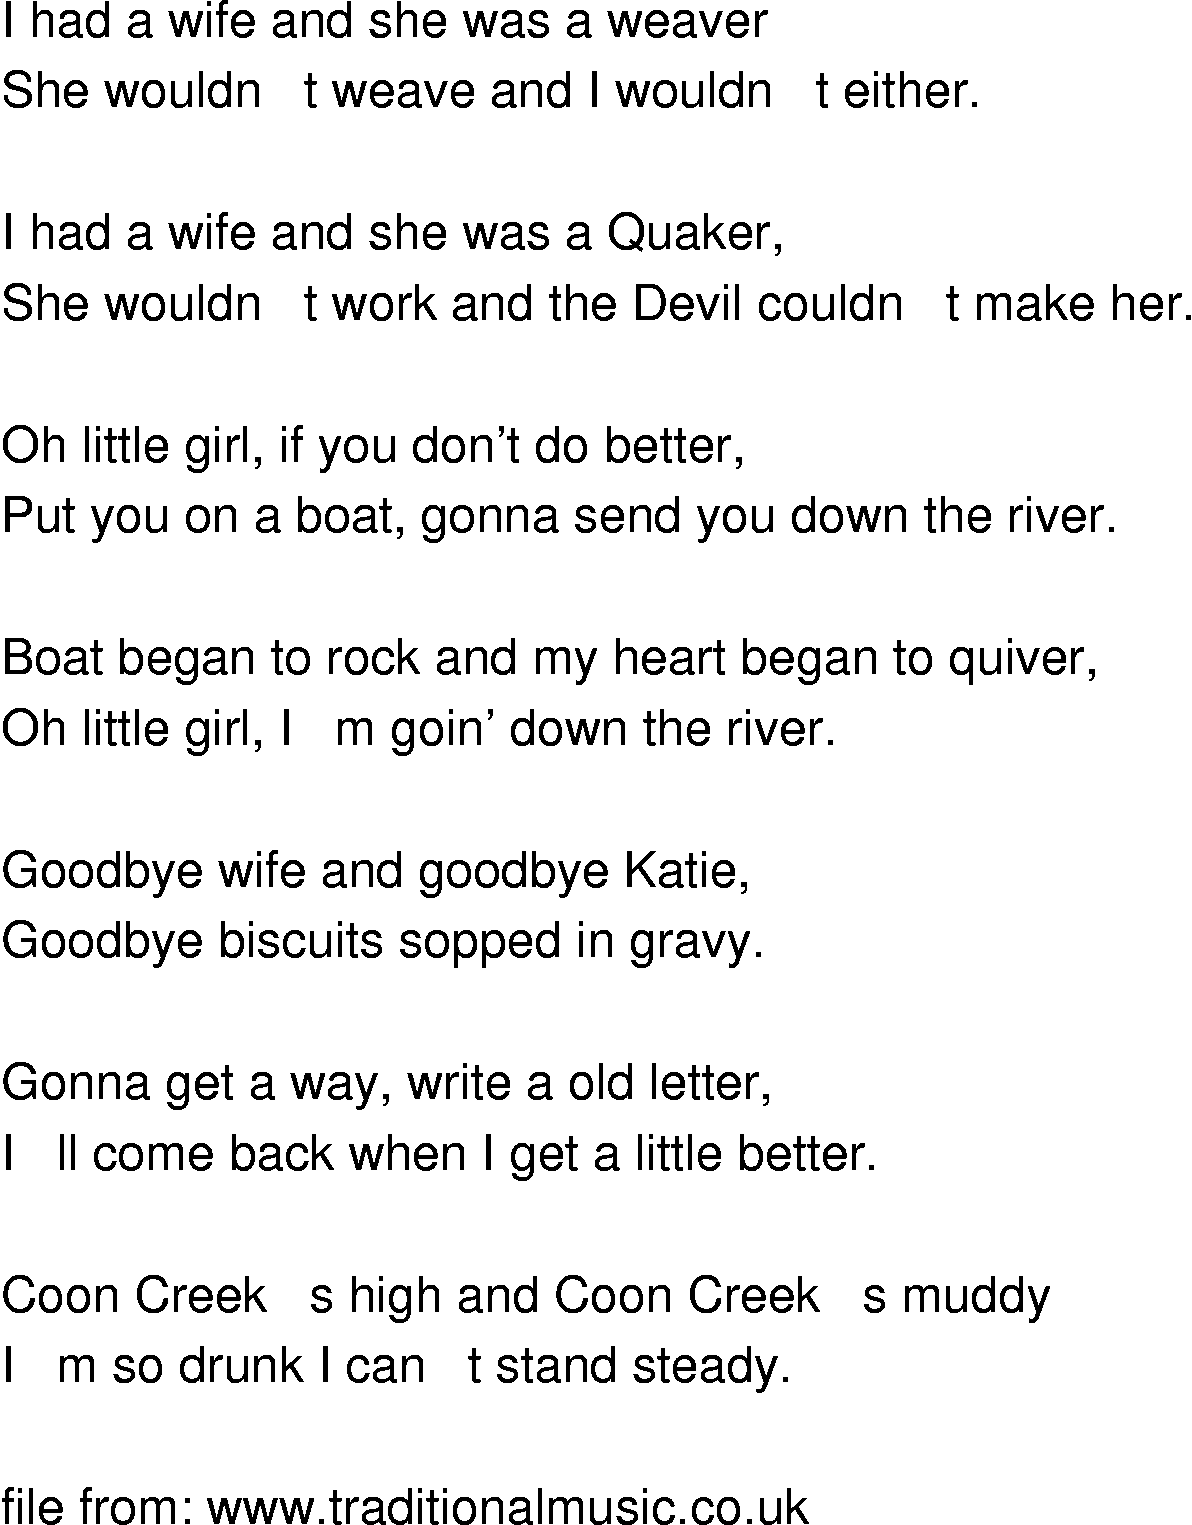 Old-Time (oldtimey) Song Lyrics - going down the river